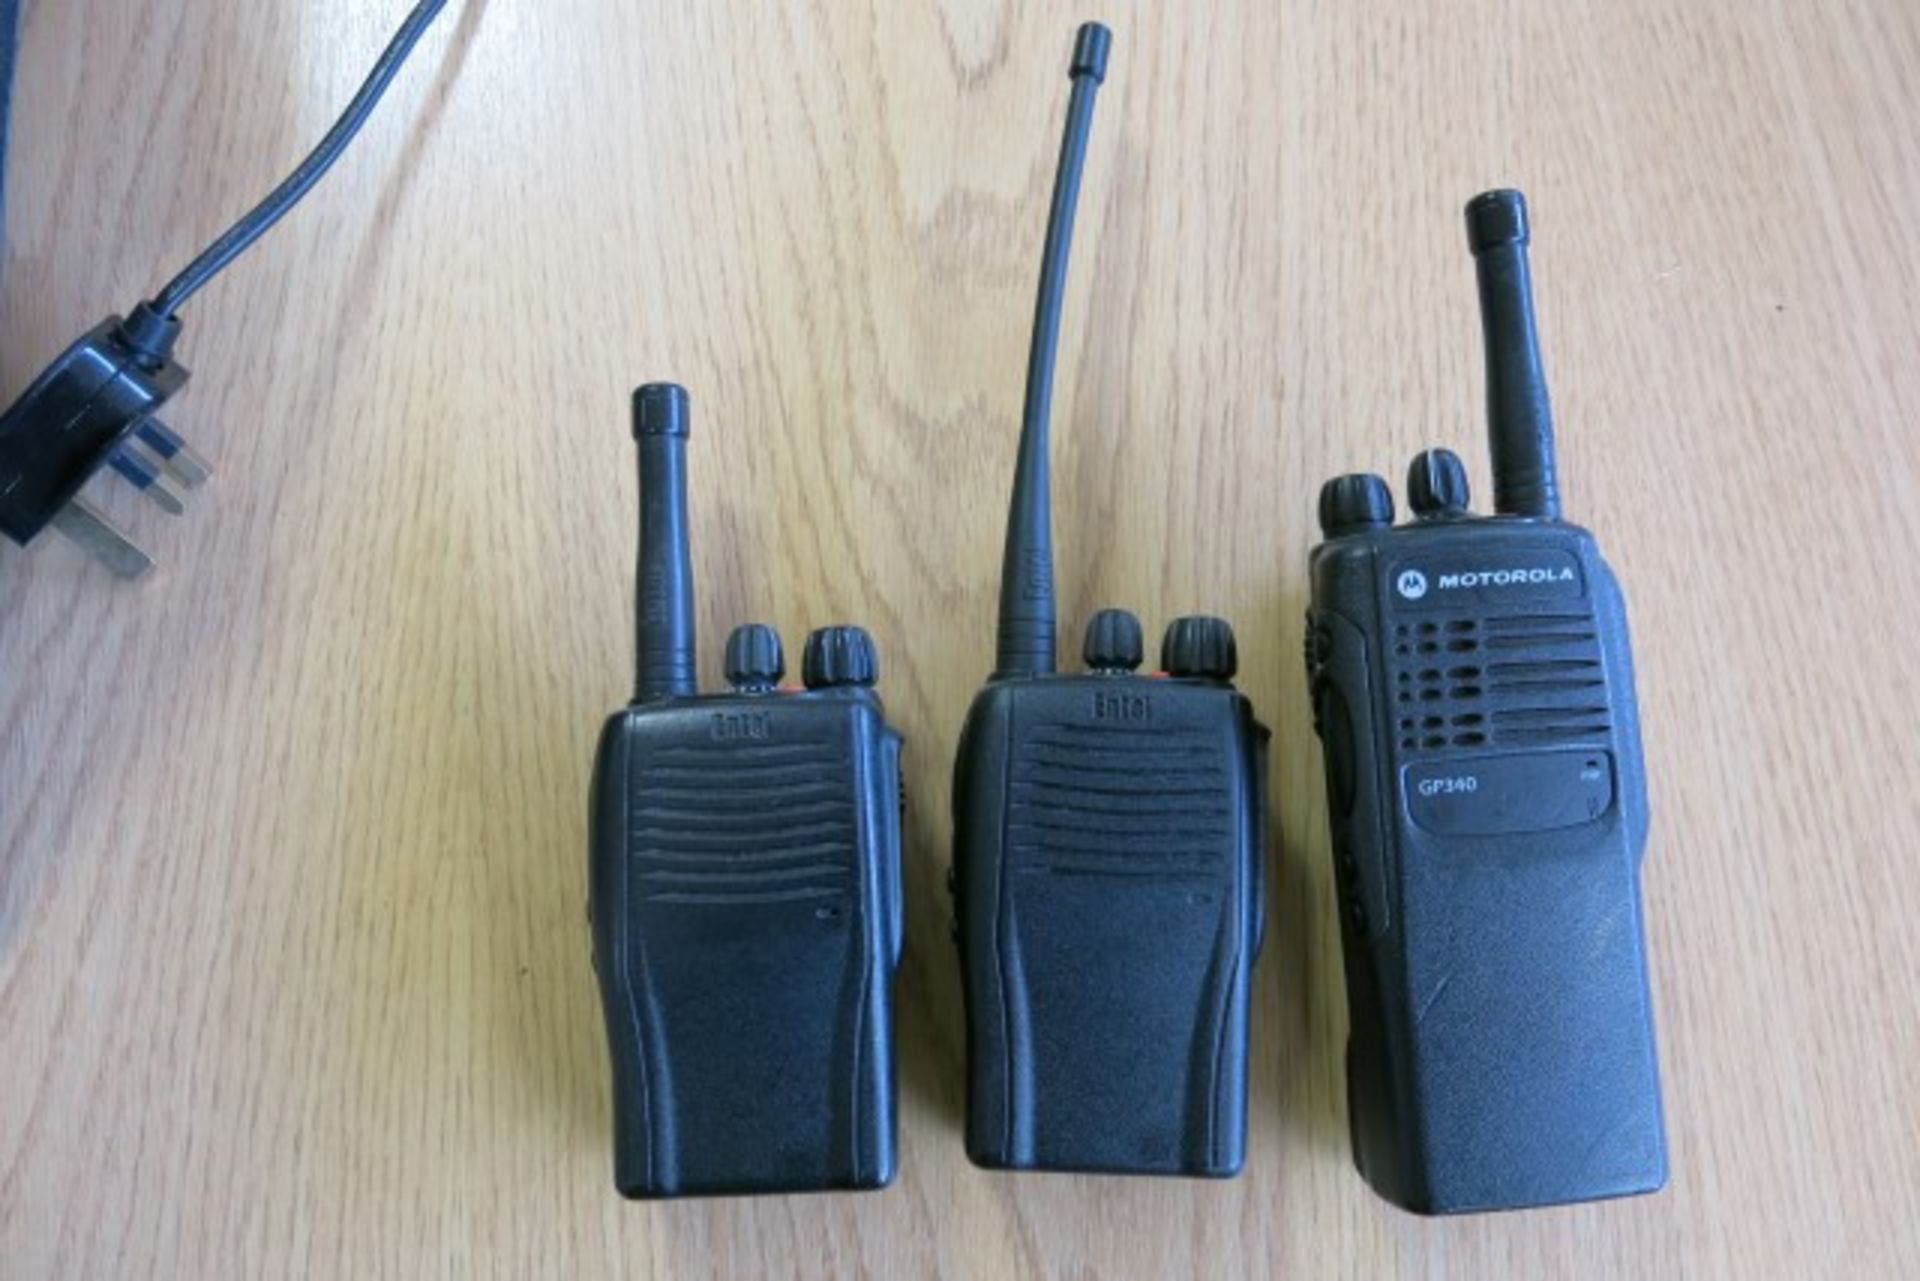 Two Way Radios & Accessories - Image 2 of 2